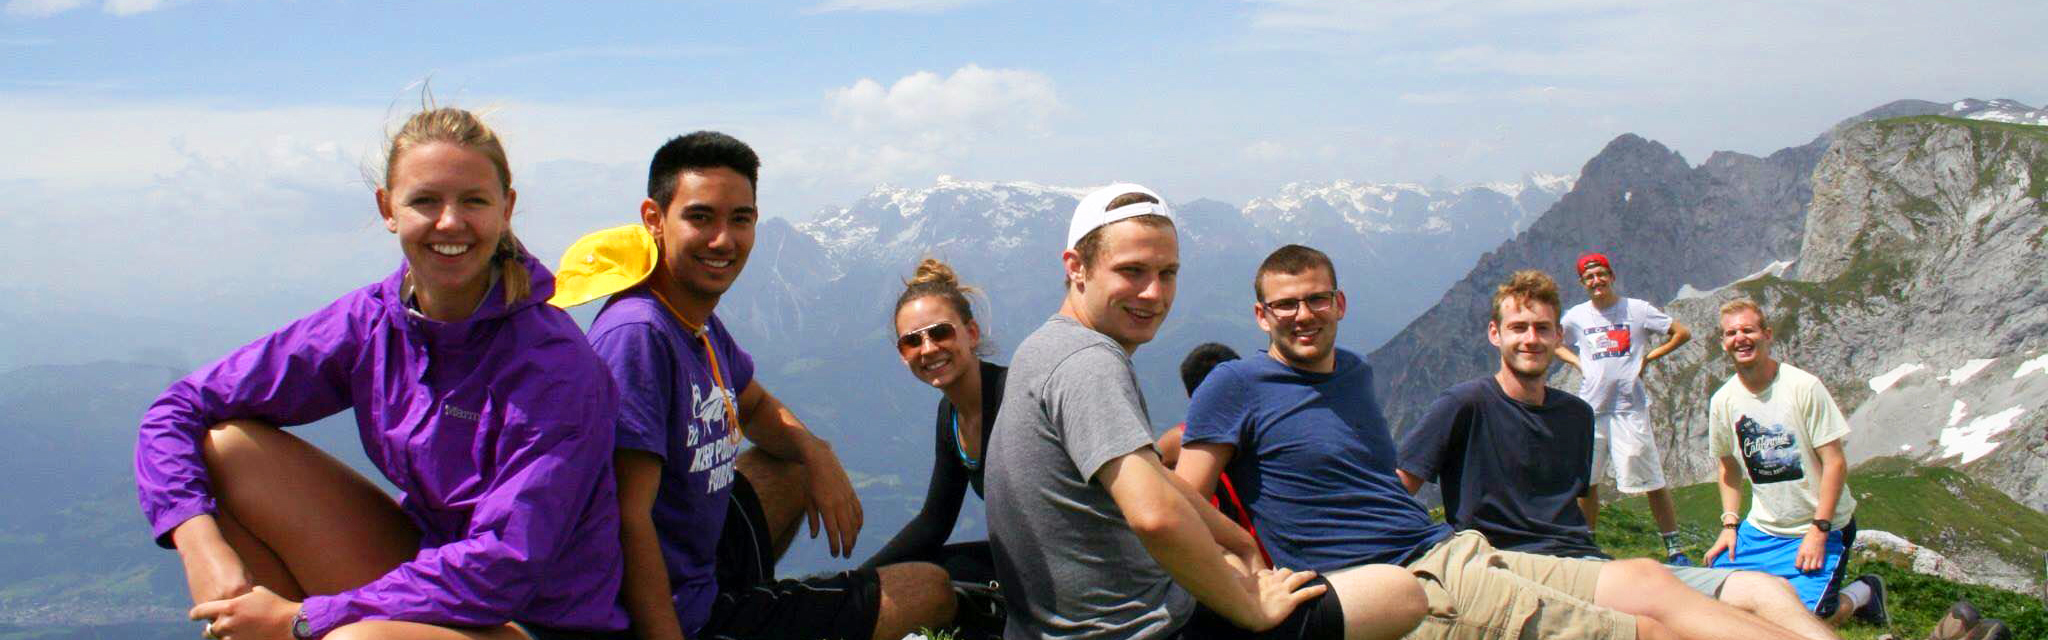 Students in the Alps